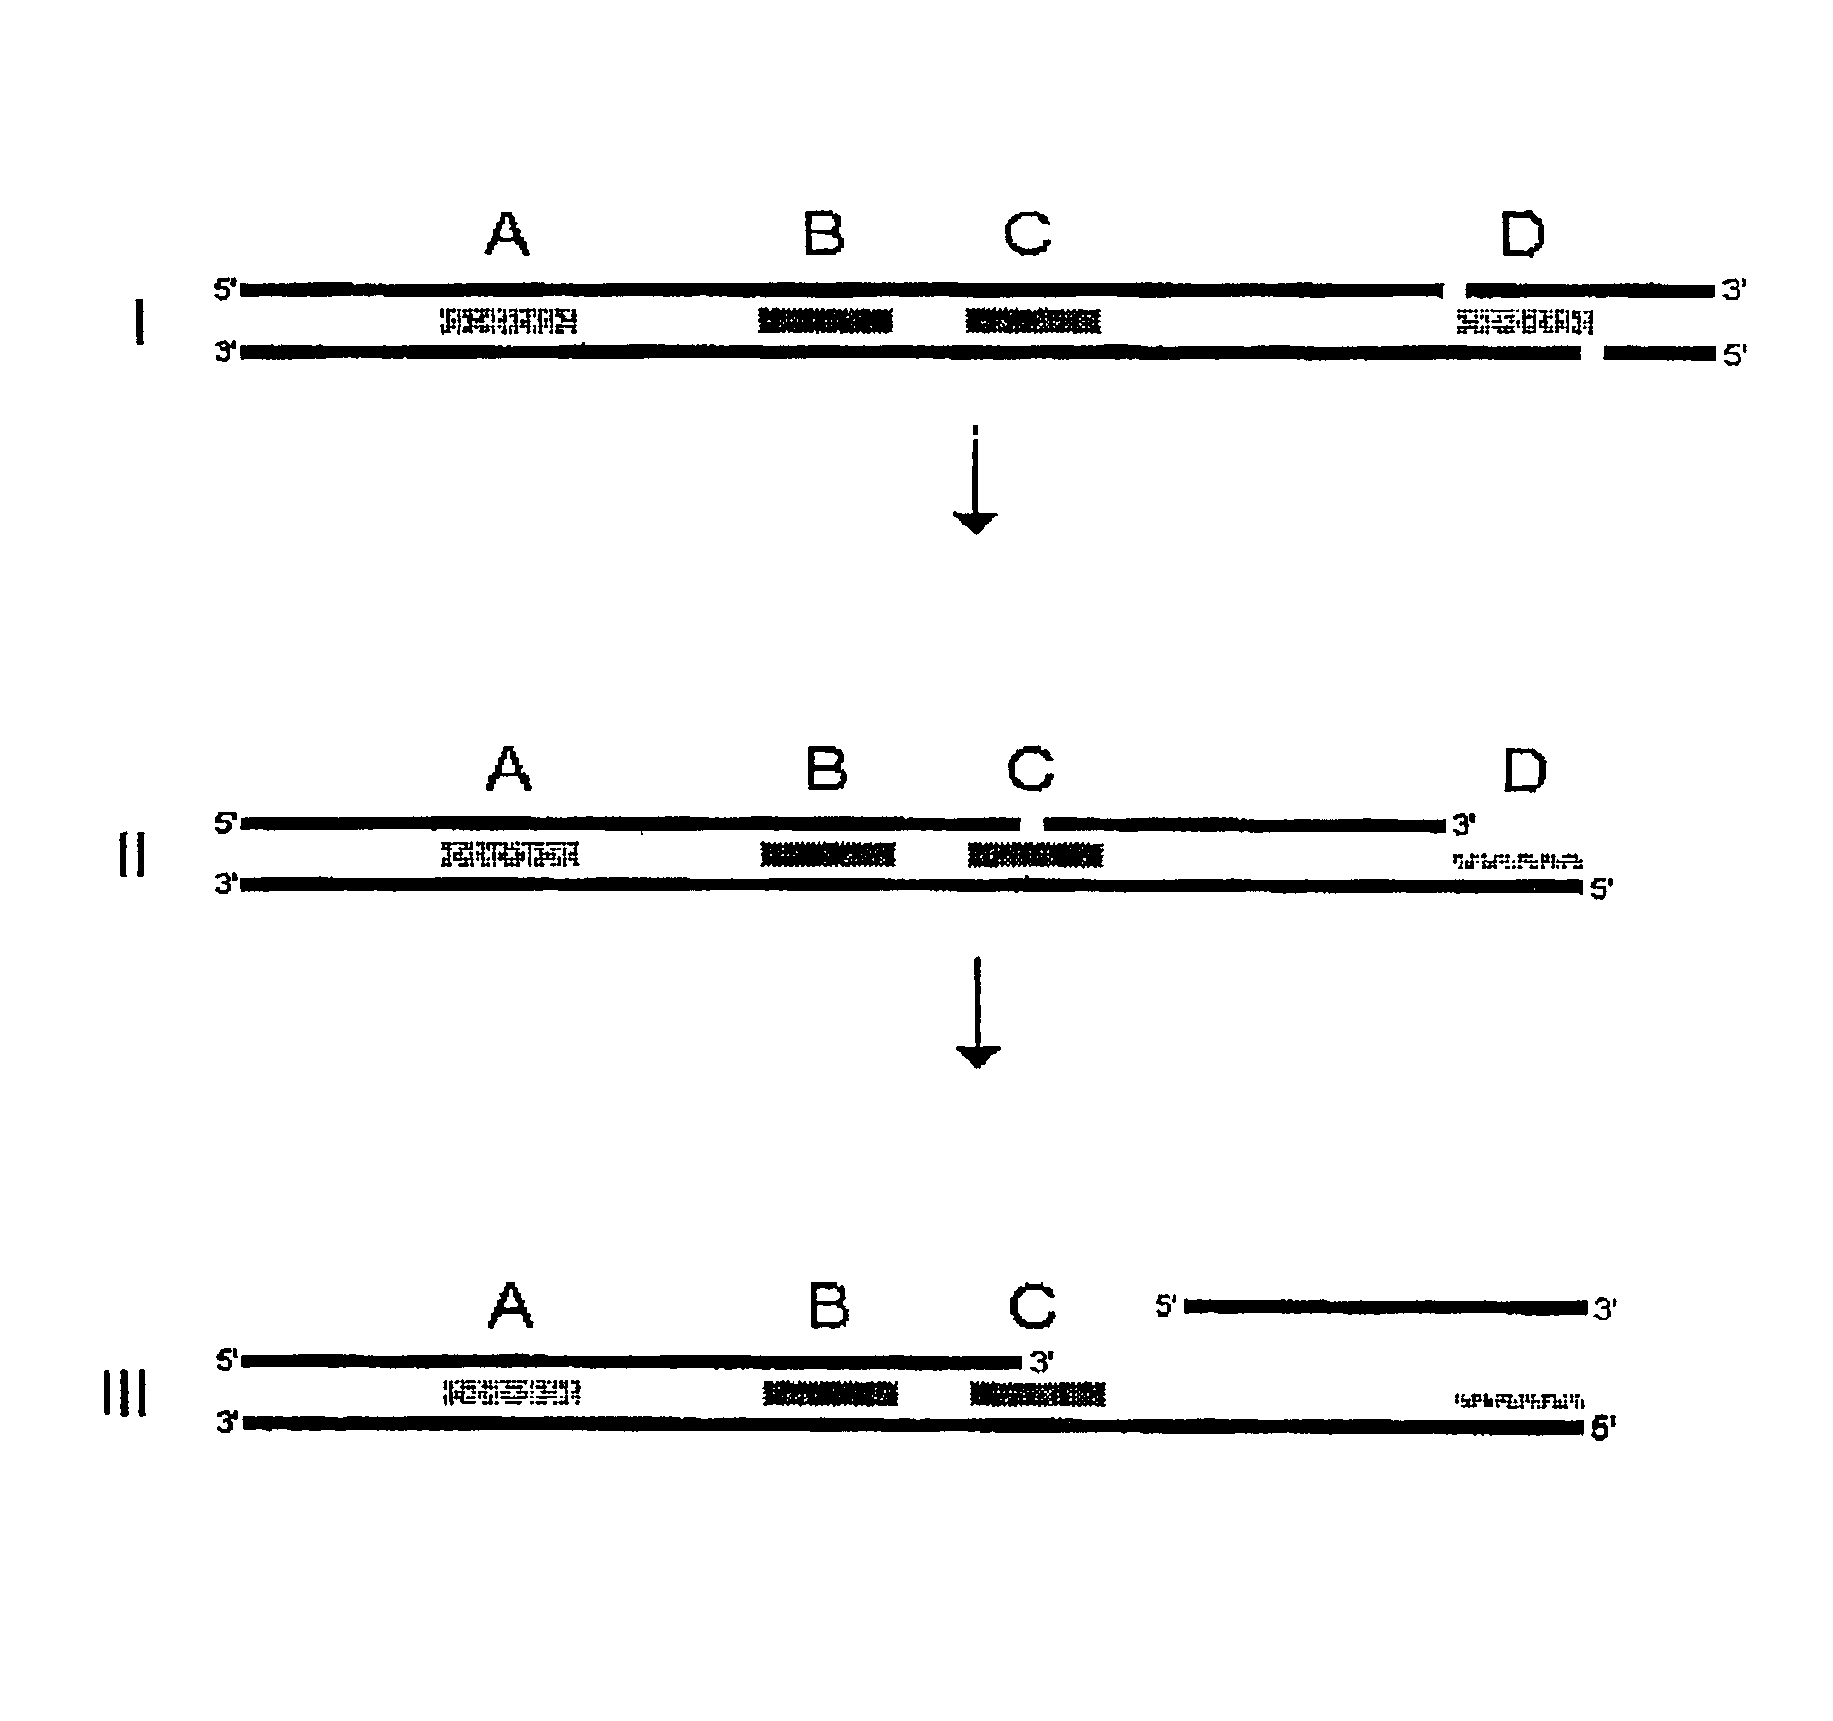 Single-stranded polynucleotide tags